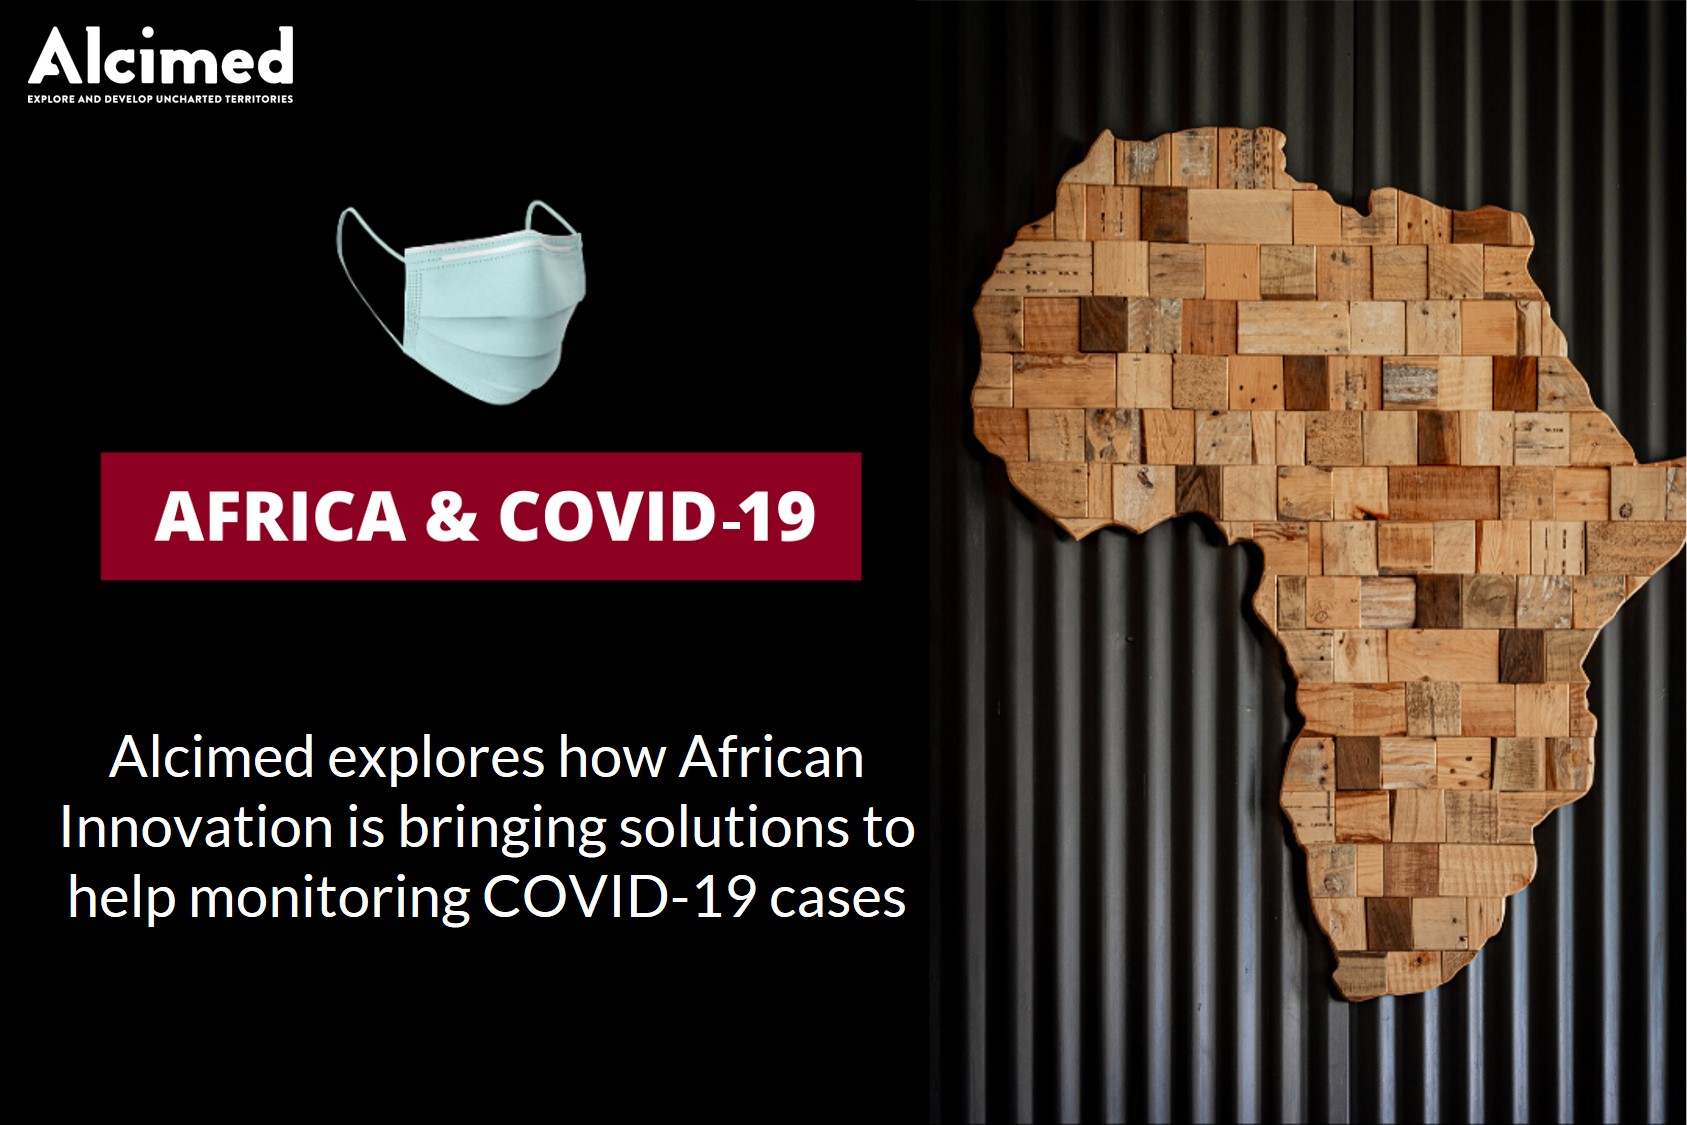 African innovation - Solutions to monitoring COVID-19